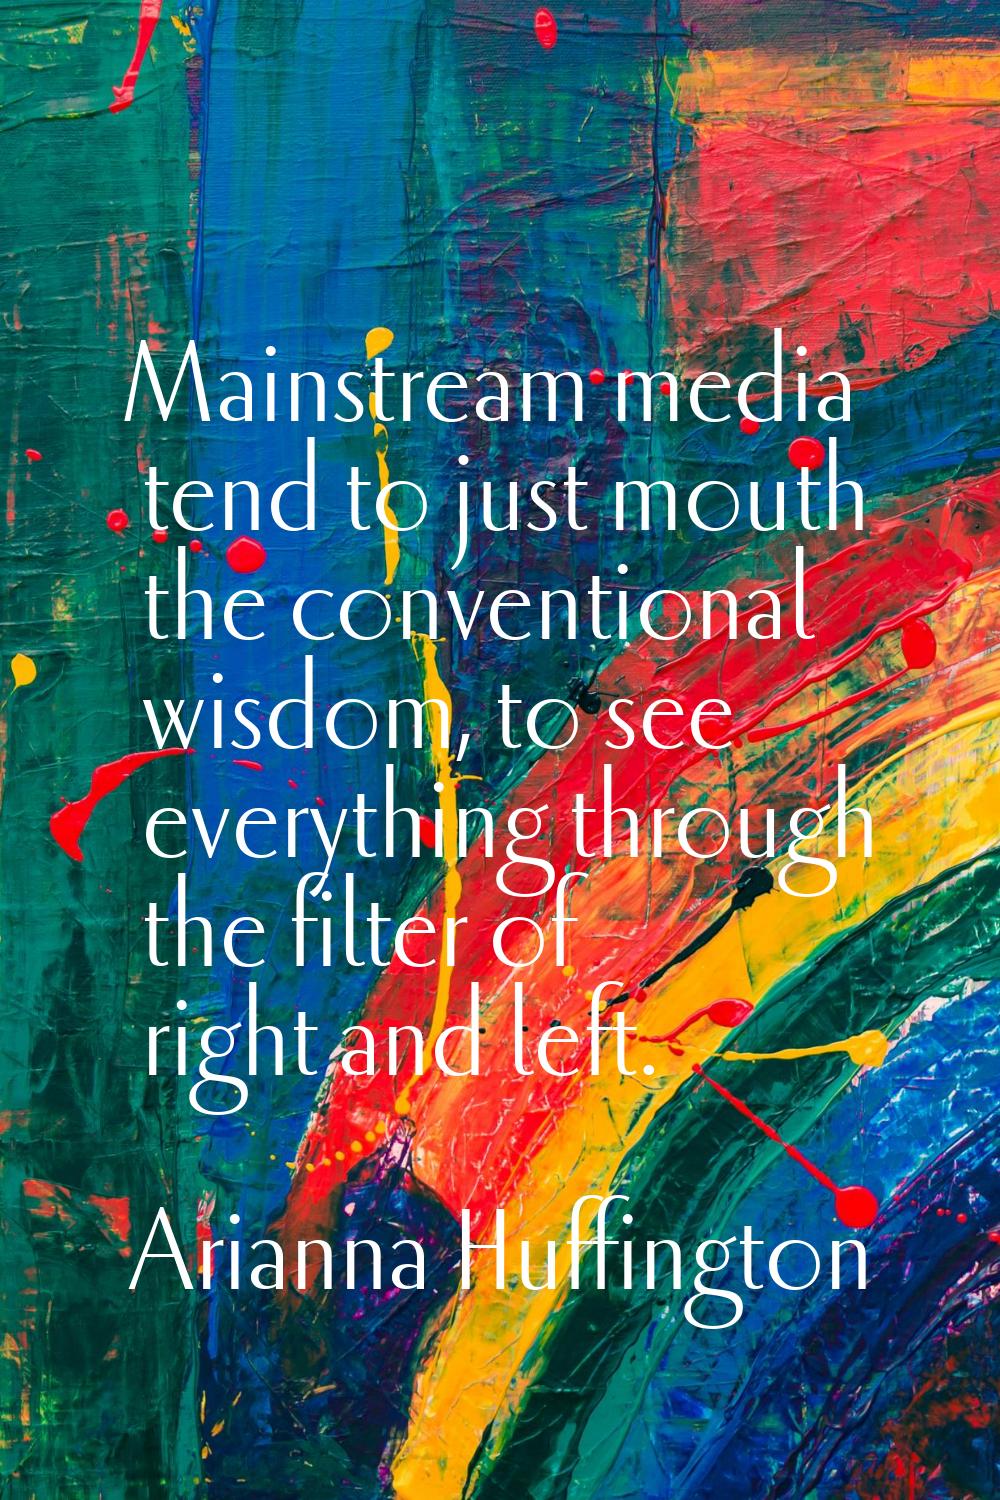 Mainstream media tend to just mouth the conventional wisdom, to see everything through the filter o